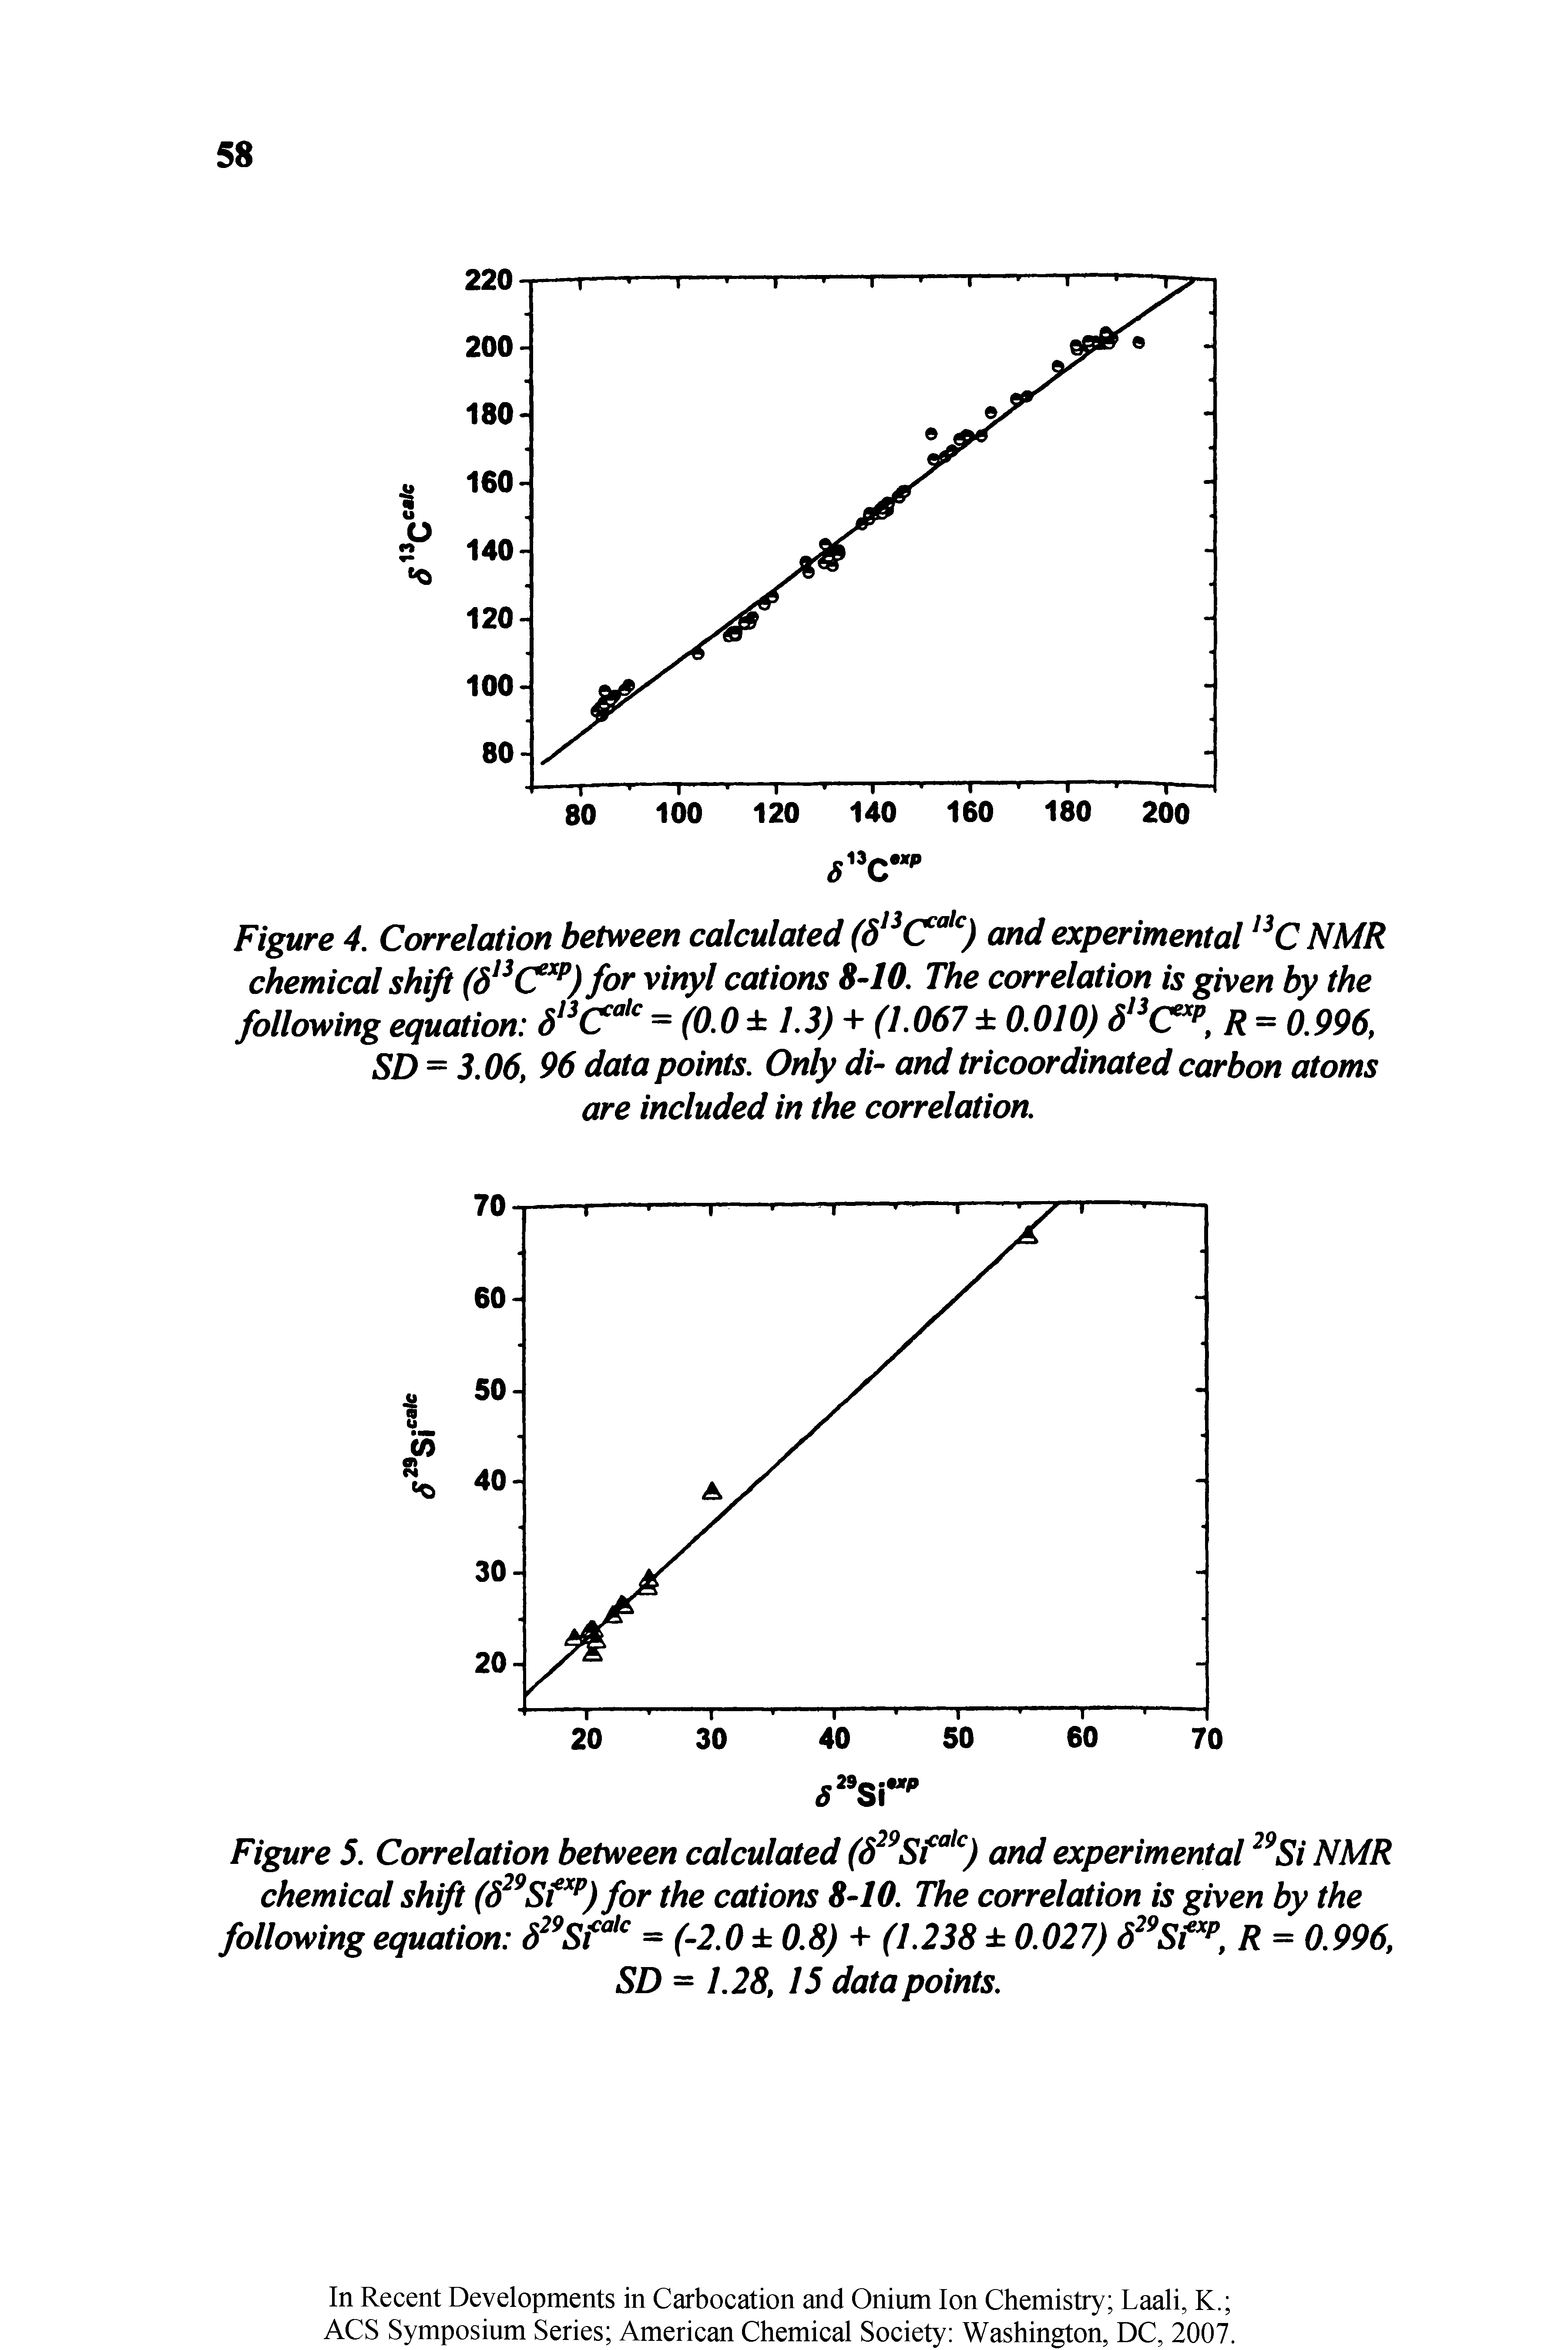 Figure 5. Correlation between calculated (S29Sfa,c) and experimental29Si NMR chemical shift (S29Sfxp) for the cations 8-10. The correlation is given by the following equation 829Si<a,c = (-2.0 0.8) + (1.238 0.027) S29Sfxp, R = 0.996,...